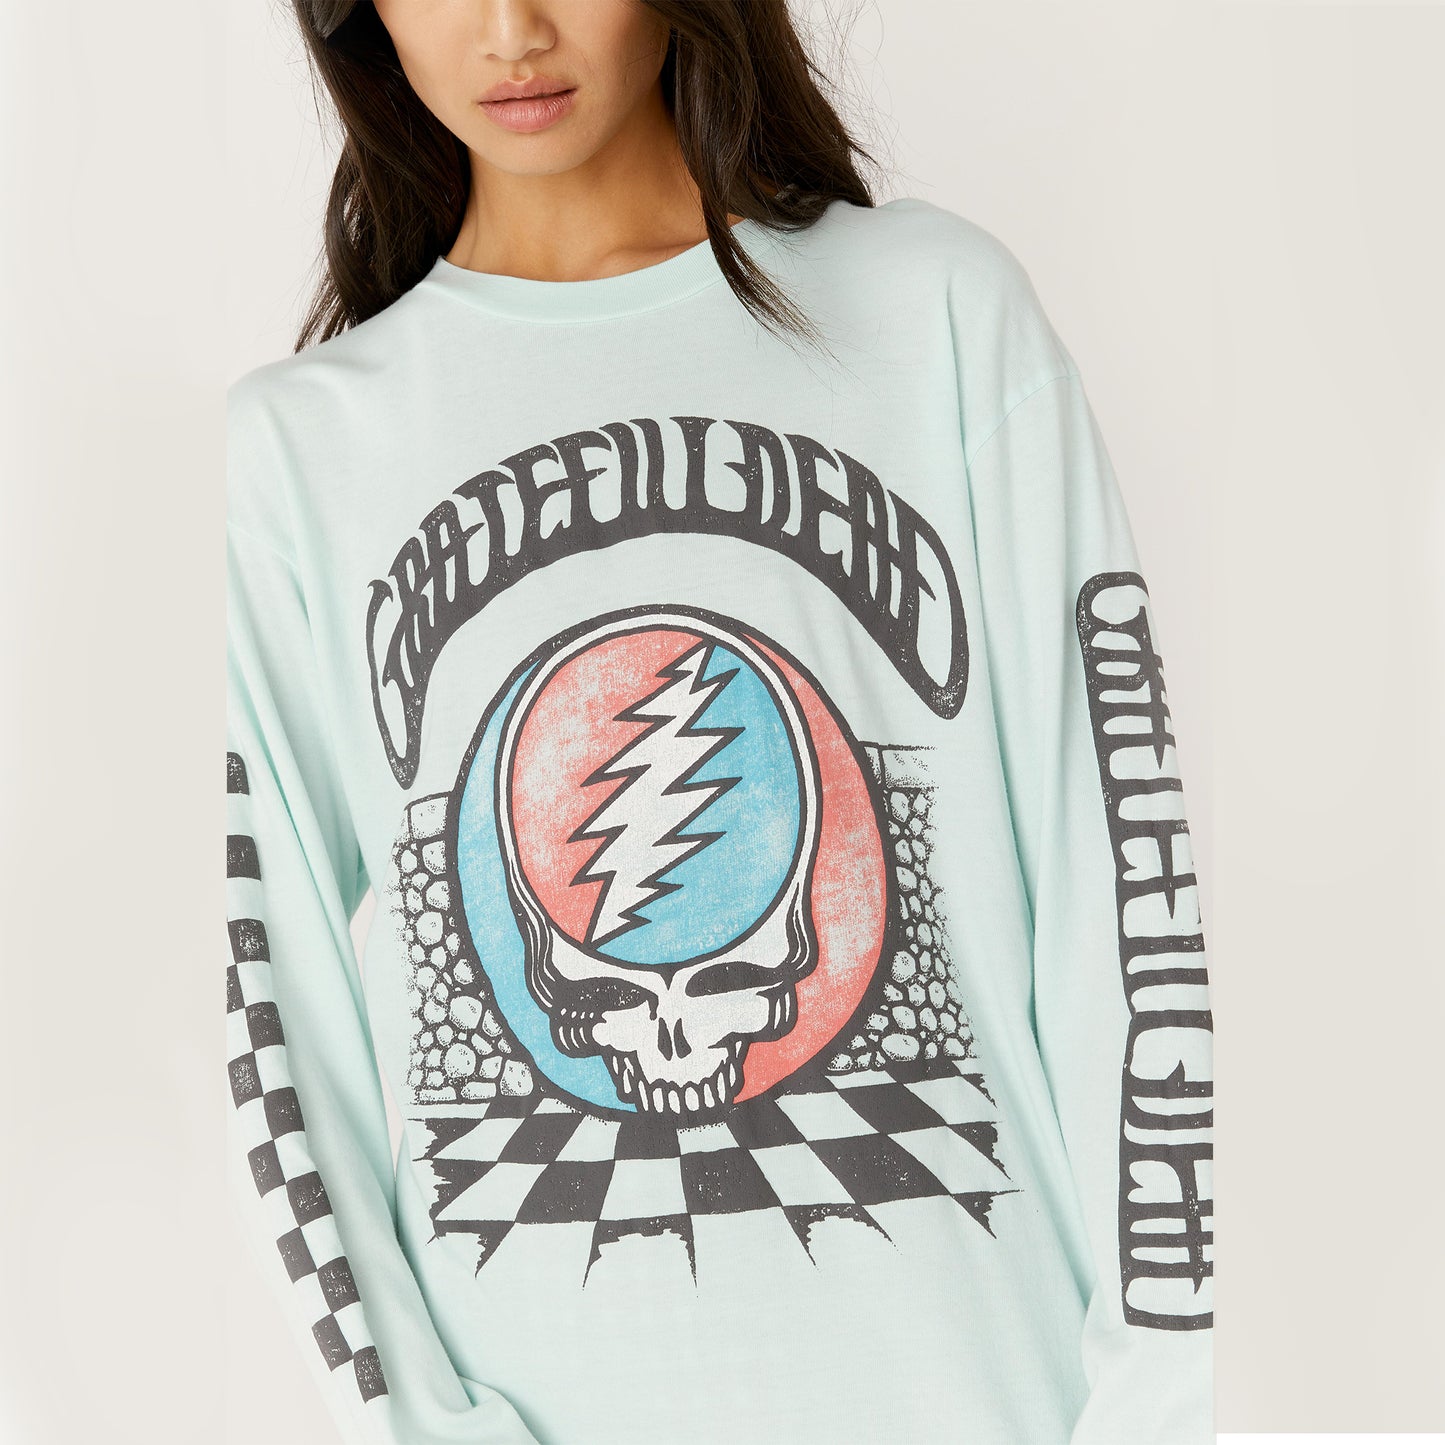 Daydreamer Grateful Dead Checkered Oversized Longsleeve. The iconic Steal Your Face logo gets a checkered update on this Grateful Dead Oversized Long Sleeve. Featuring the original skull and lightning bolt logo, you’ll be easy to spot by both Deadheads and non-fans alike. Complete with checkered graphics on the front and down the right sleeve, this beach glass hued piece finds the ideal balance between classic and edge. Perfect for all occasions, no matter where your long strange trips take you.